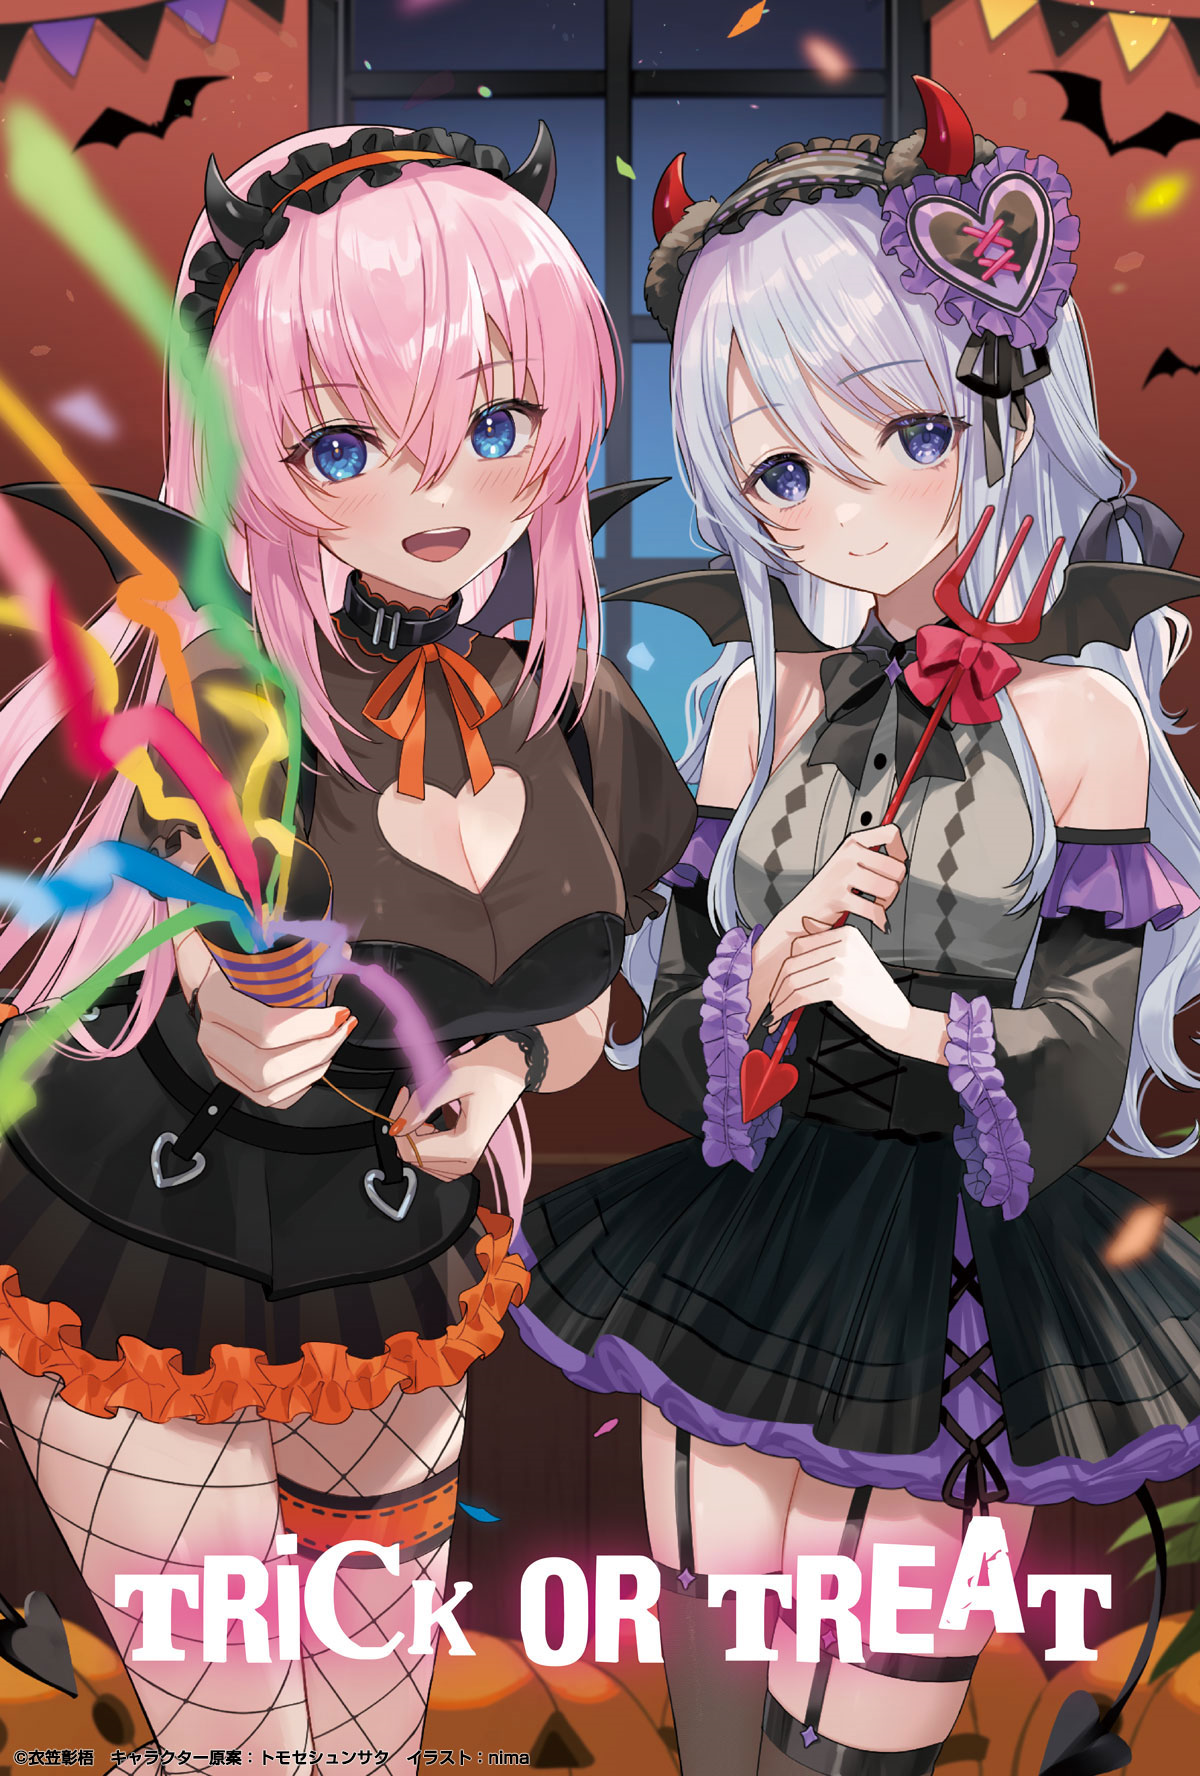 insert image of ichinose and hiyori from classroom of the elite trick or treat halloween poster promotion